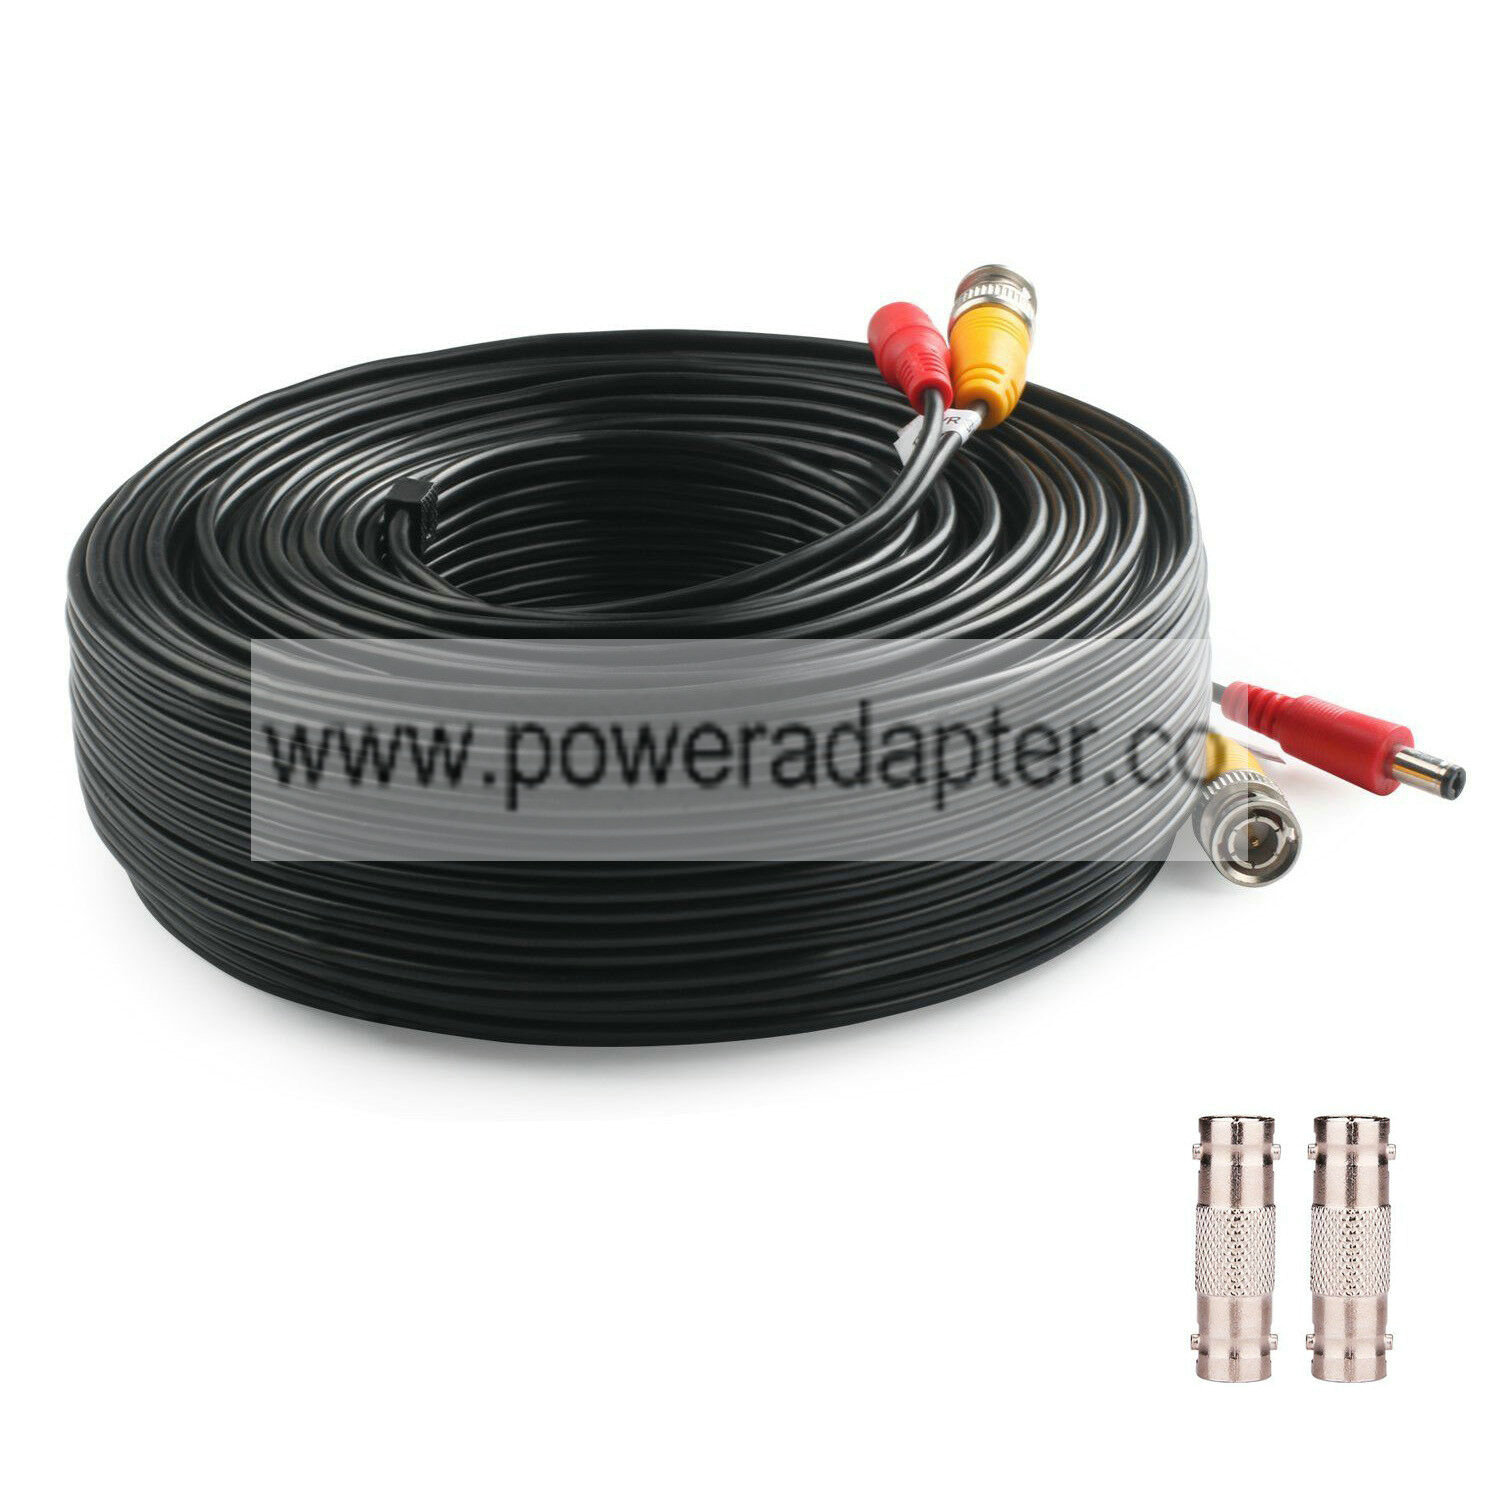 150ft Power Video Security Camera Cable BNC Extension Wire Cord for All CCTV DVR Compatible Device: Security Camera M